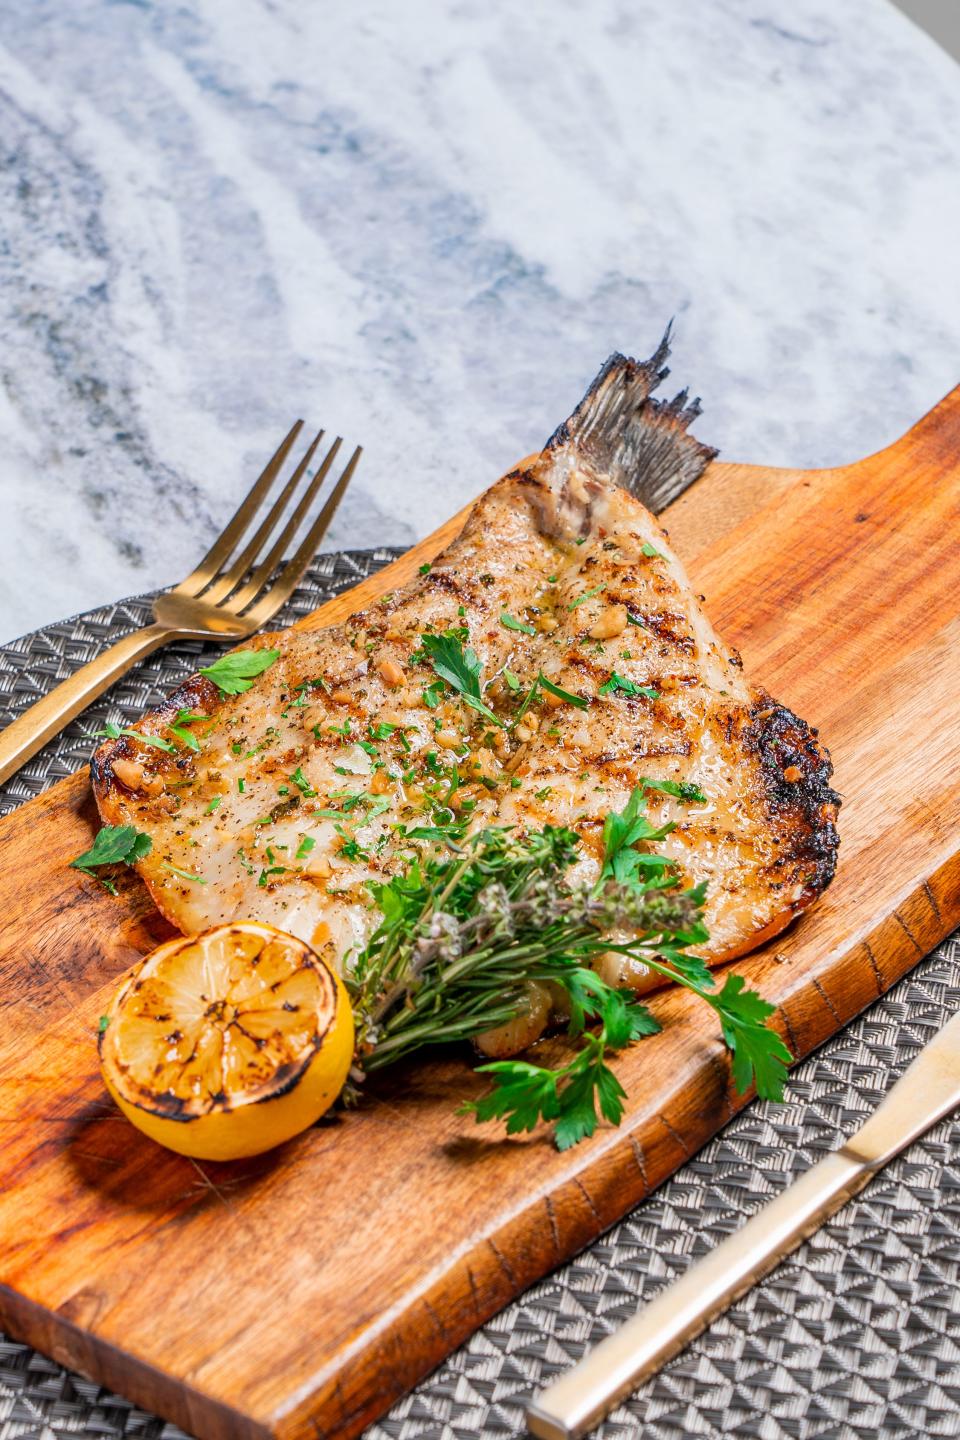 The Grilled Branzino at Hotel Figueroa's Sparrow restaurant in Los Angeles